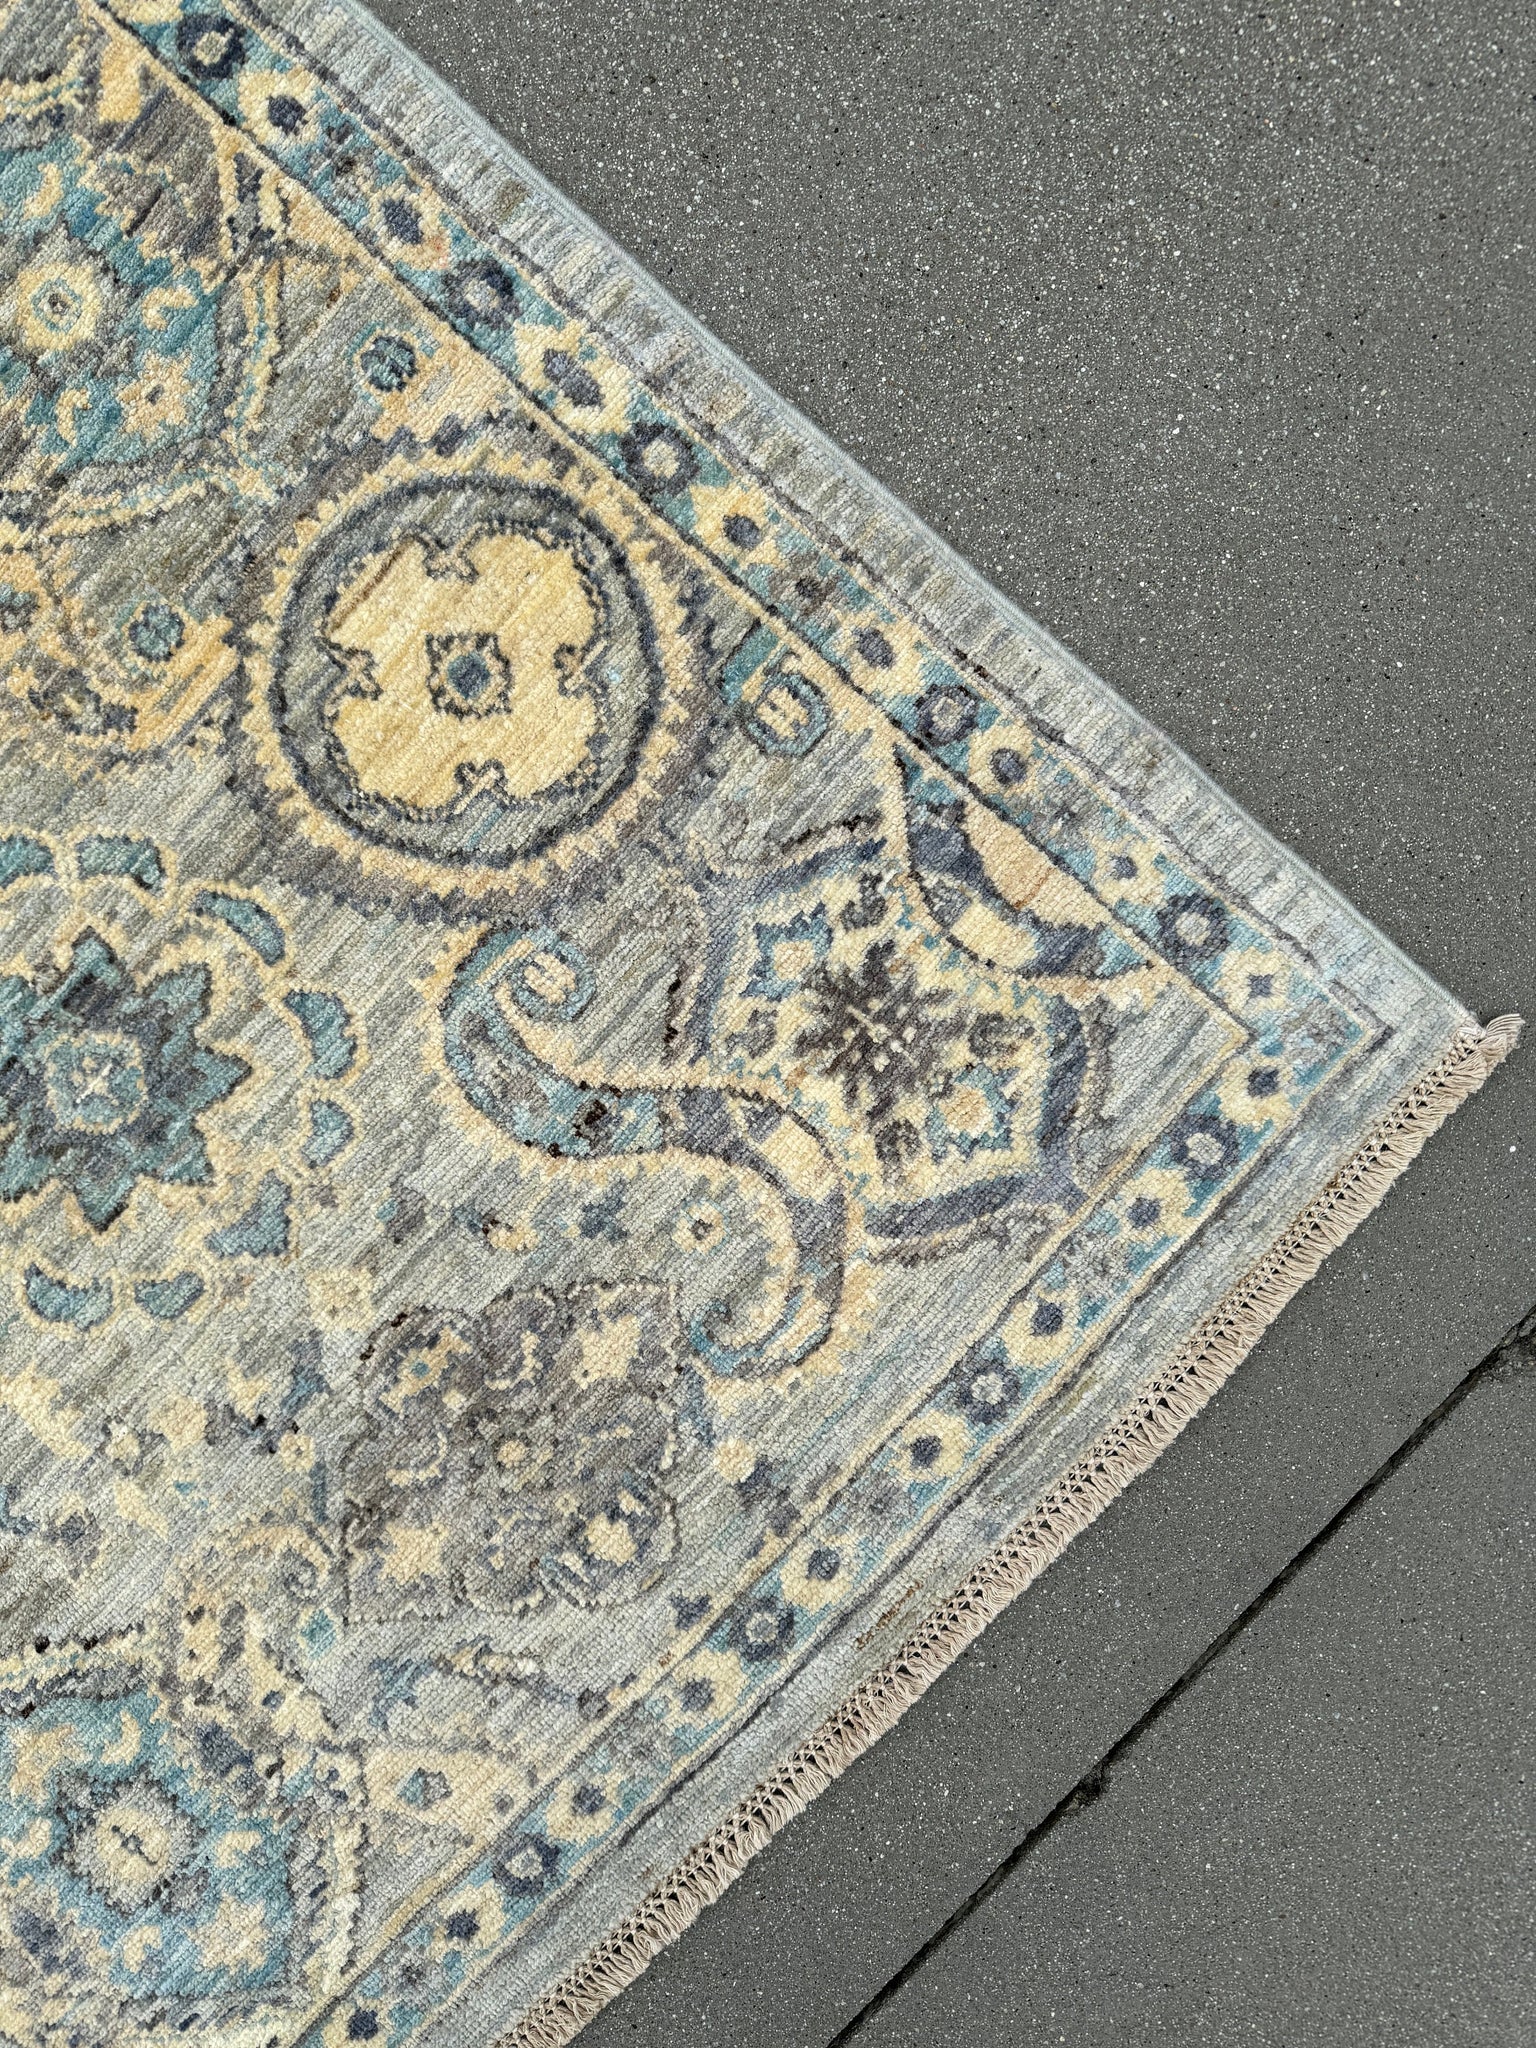 6x8-9 (182x260) Handmade Afghan Rug | Cream Denim Baby Blue Grey Teal Gold Beige Taupe | Wool Medallion Hand Knotted